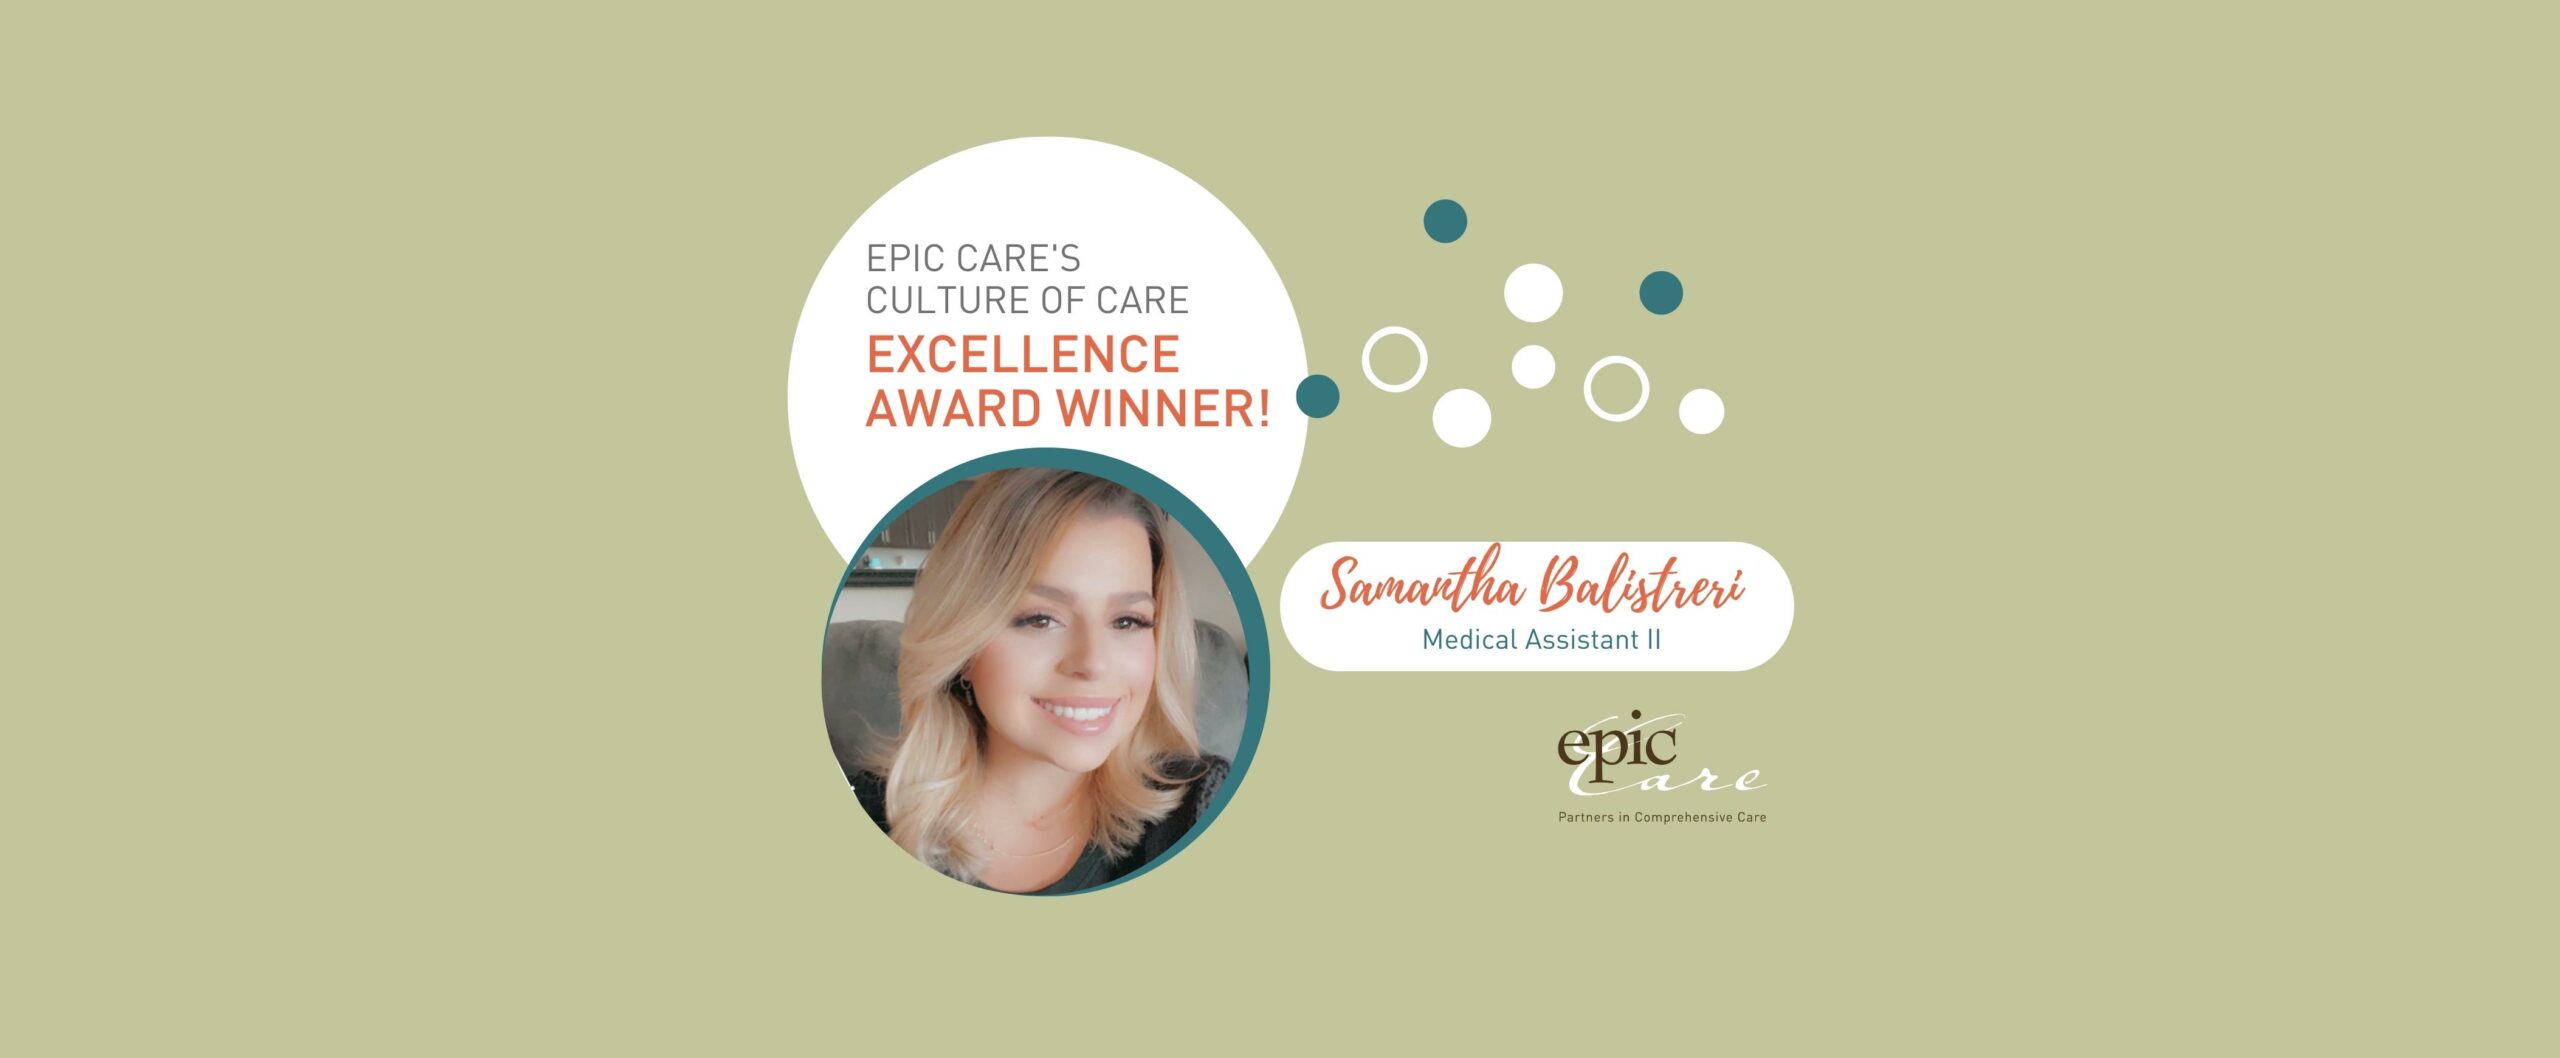 Epic Care’s Culture of CARE Excellence Award Winner! – Samantha Balistreri